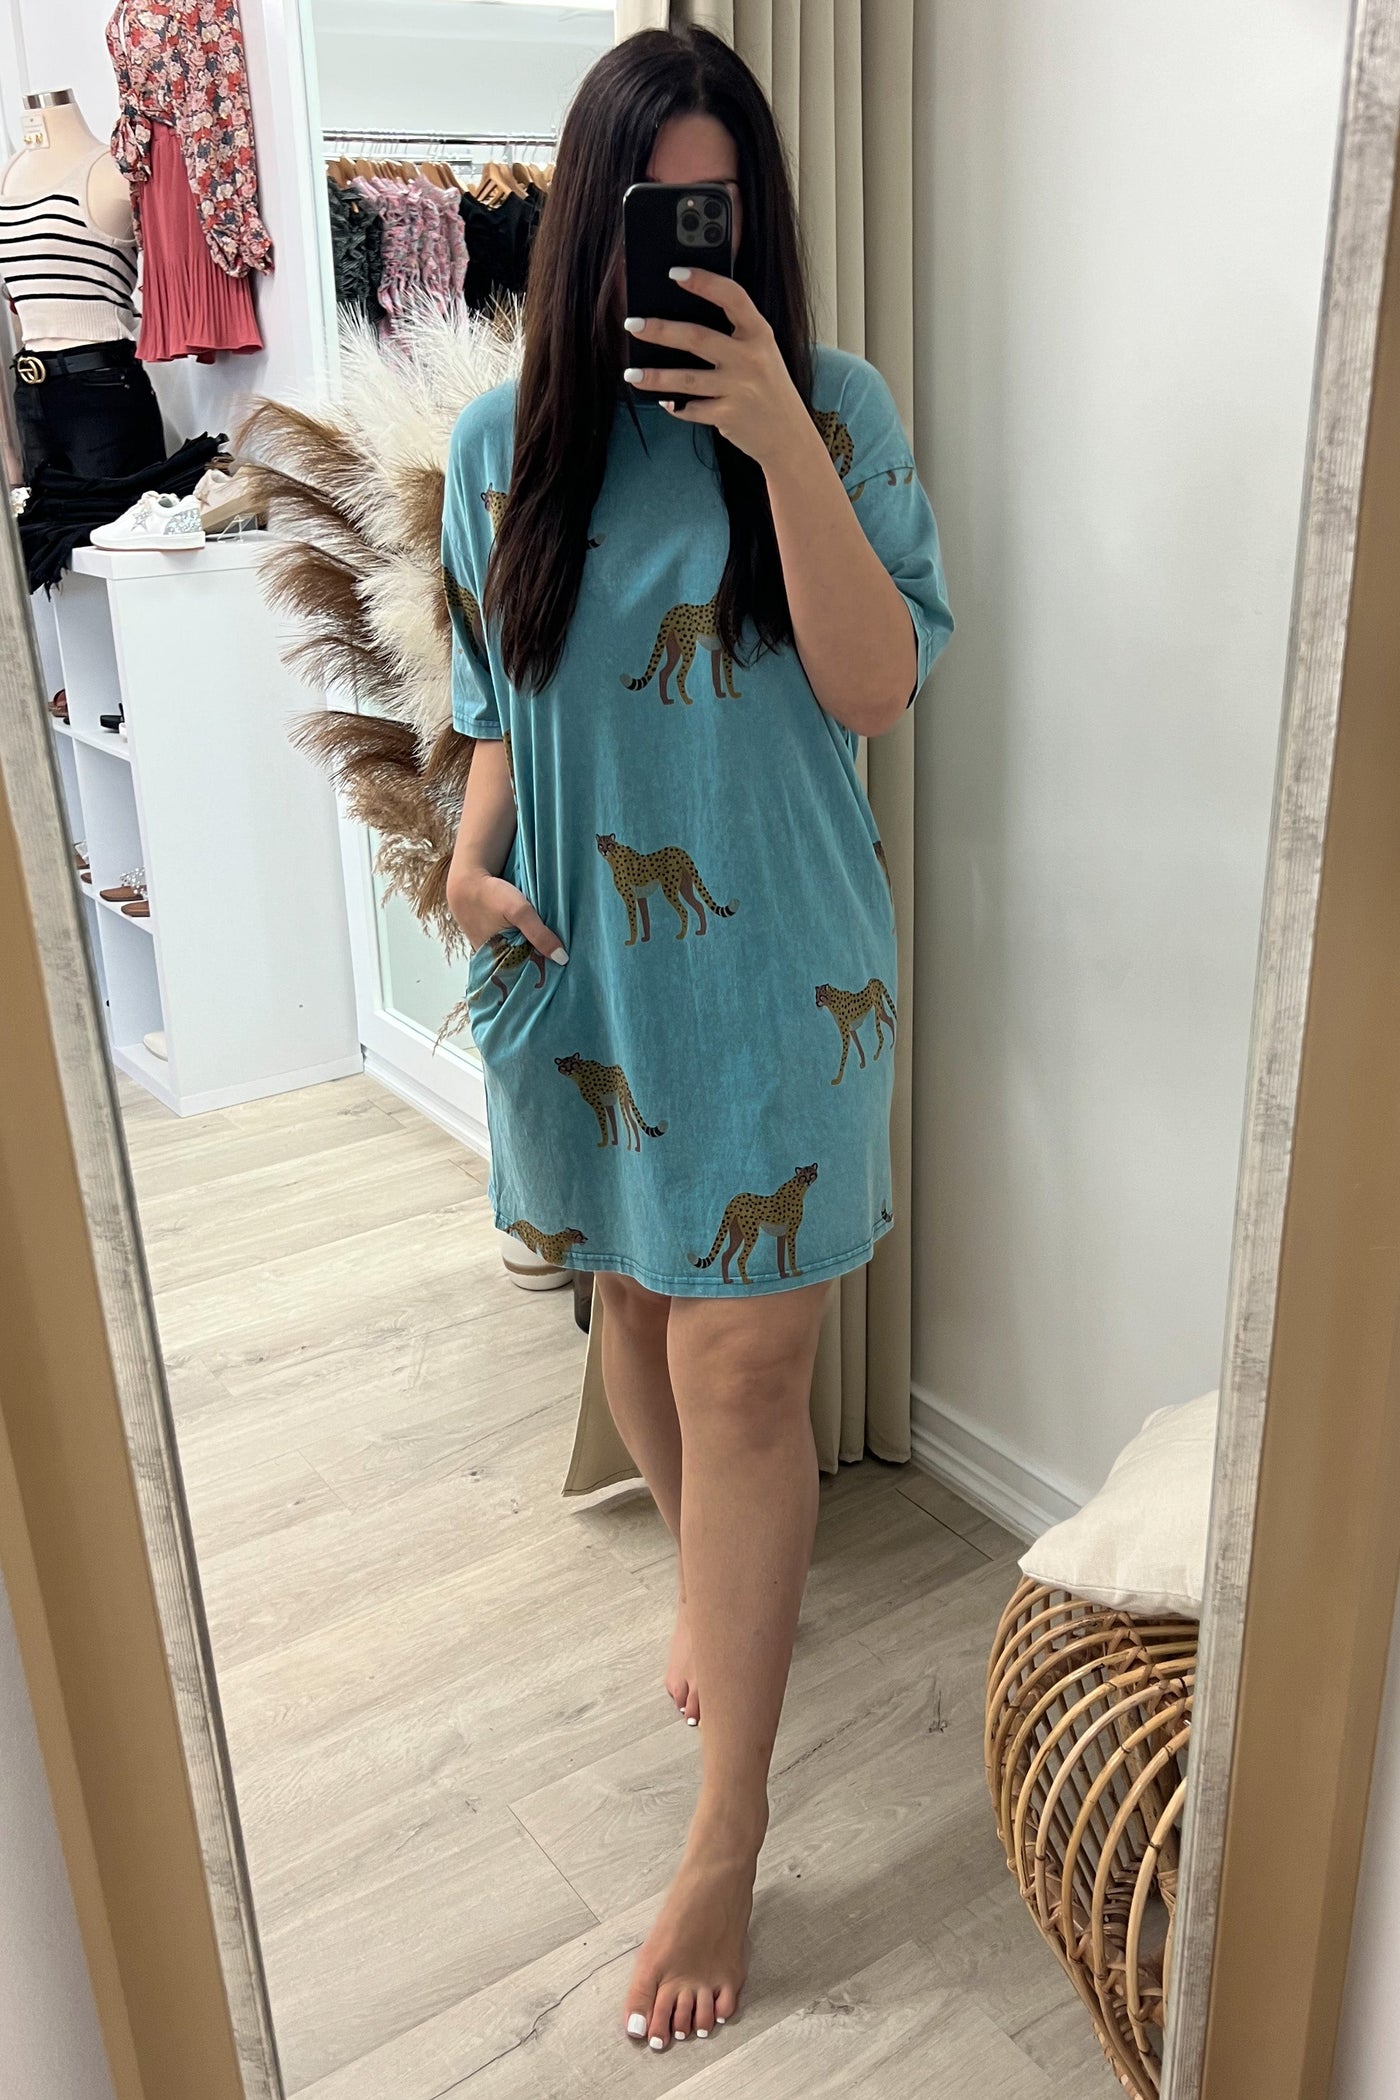 "Cheetah Or Not" T-Shirt Dress - Happily Ever Aften